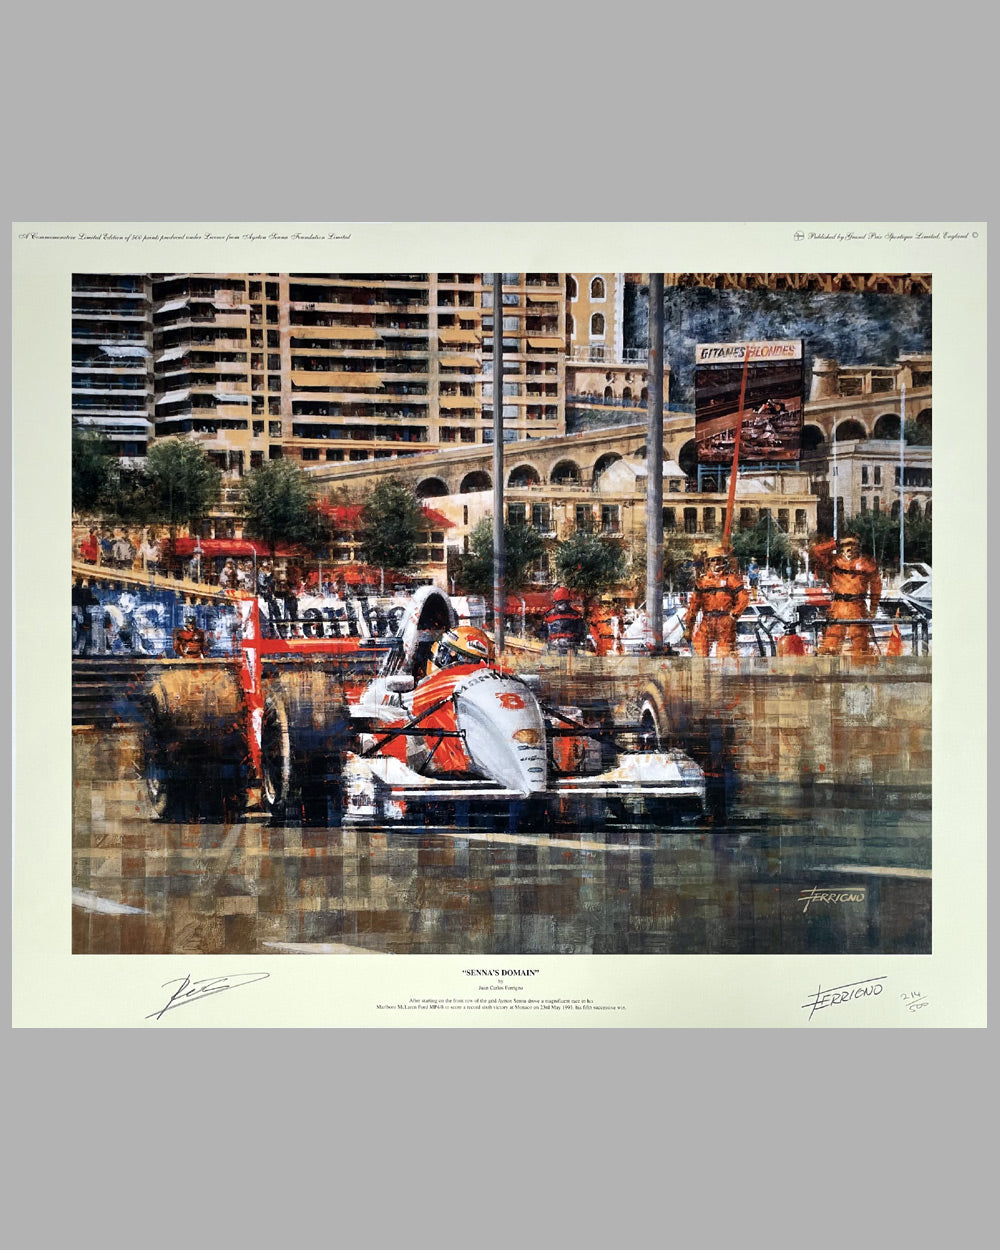 Senna’s Domain print by Juan Carlos Ferrigno, autographed by Peter Warr